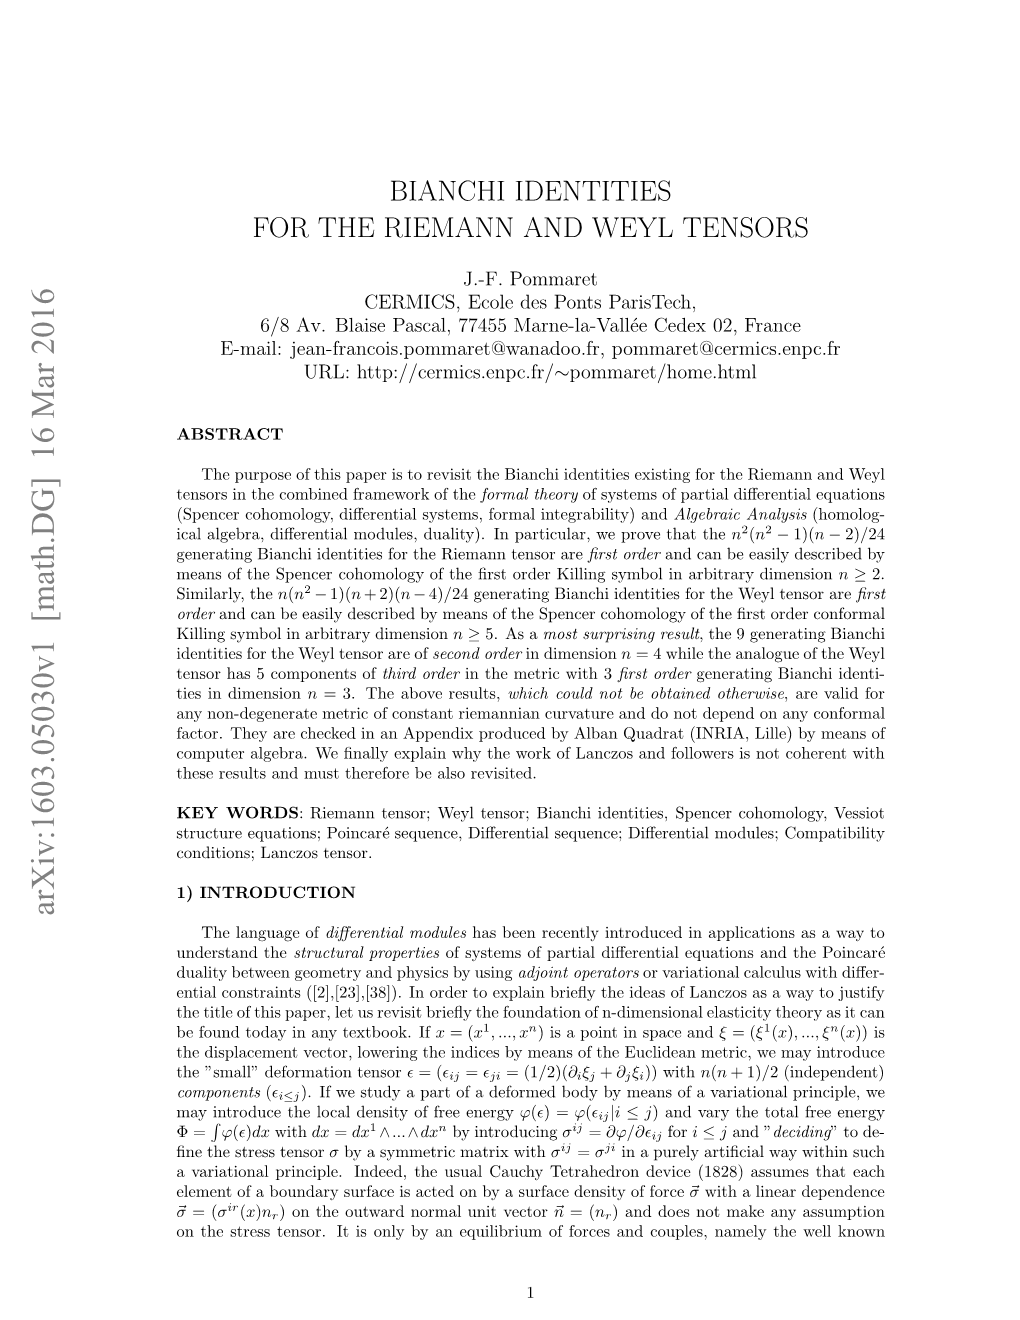 Bianchi Identities for the Riemann and Weyl Tensors